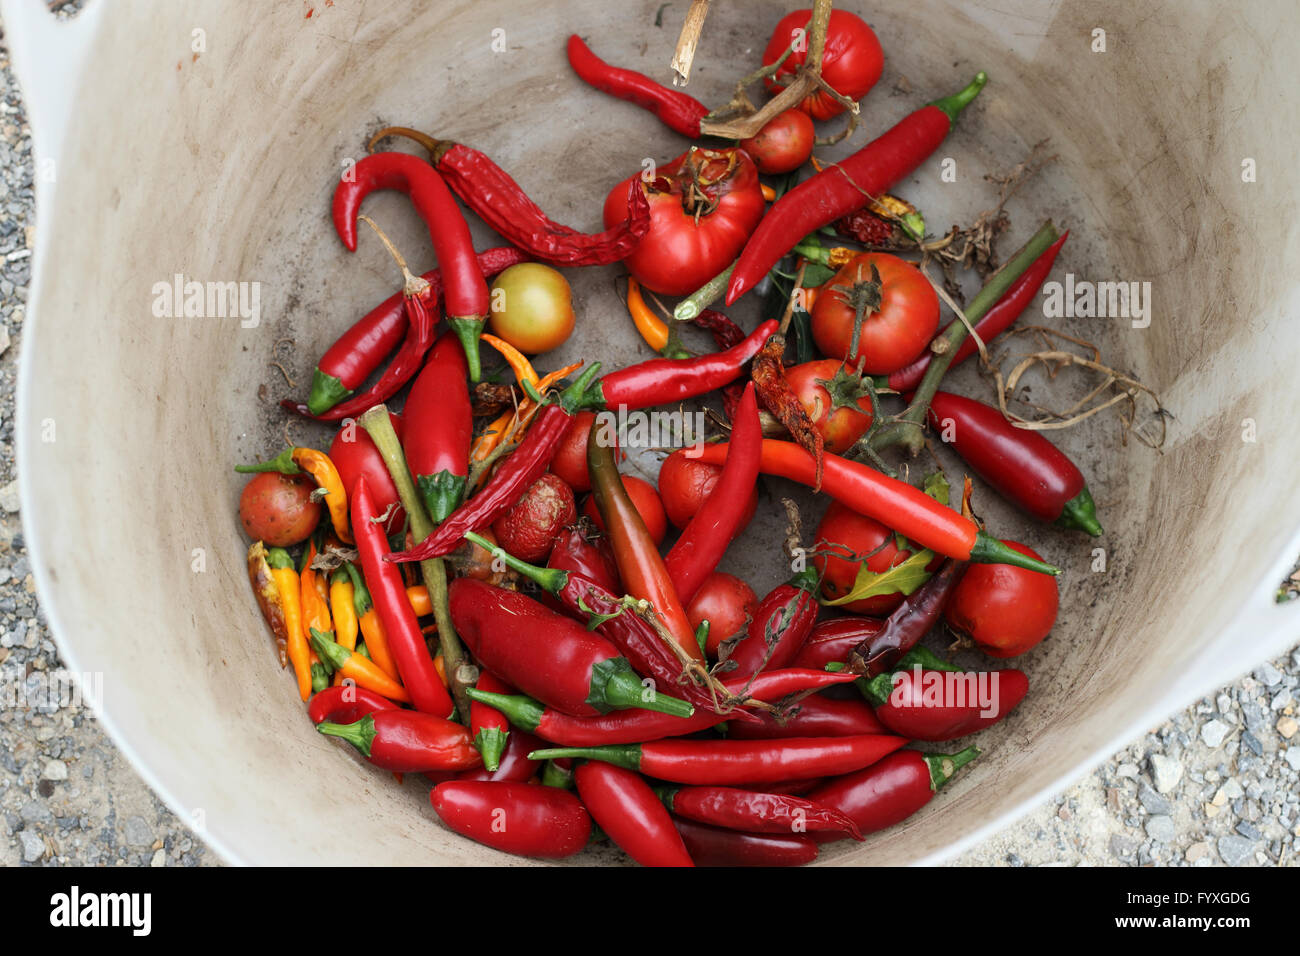 Freshly picked homegrown red chilis peppers and tomatoes Stock Photo